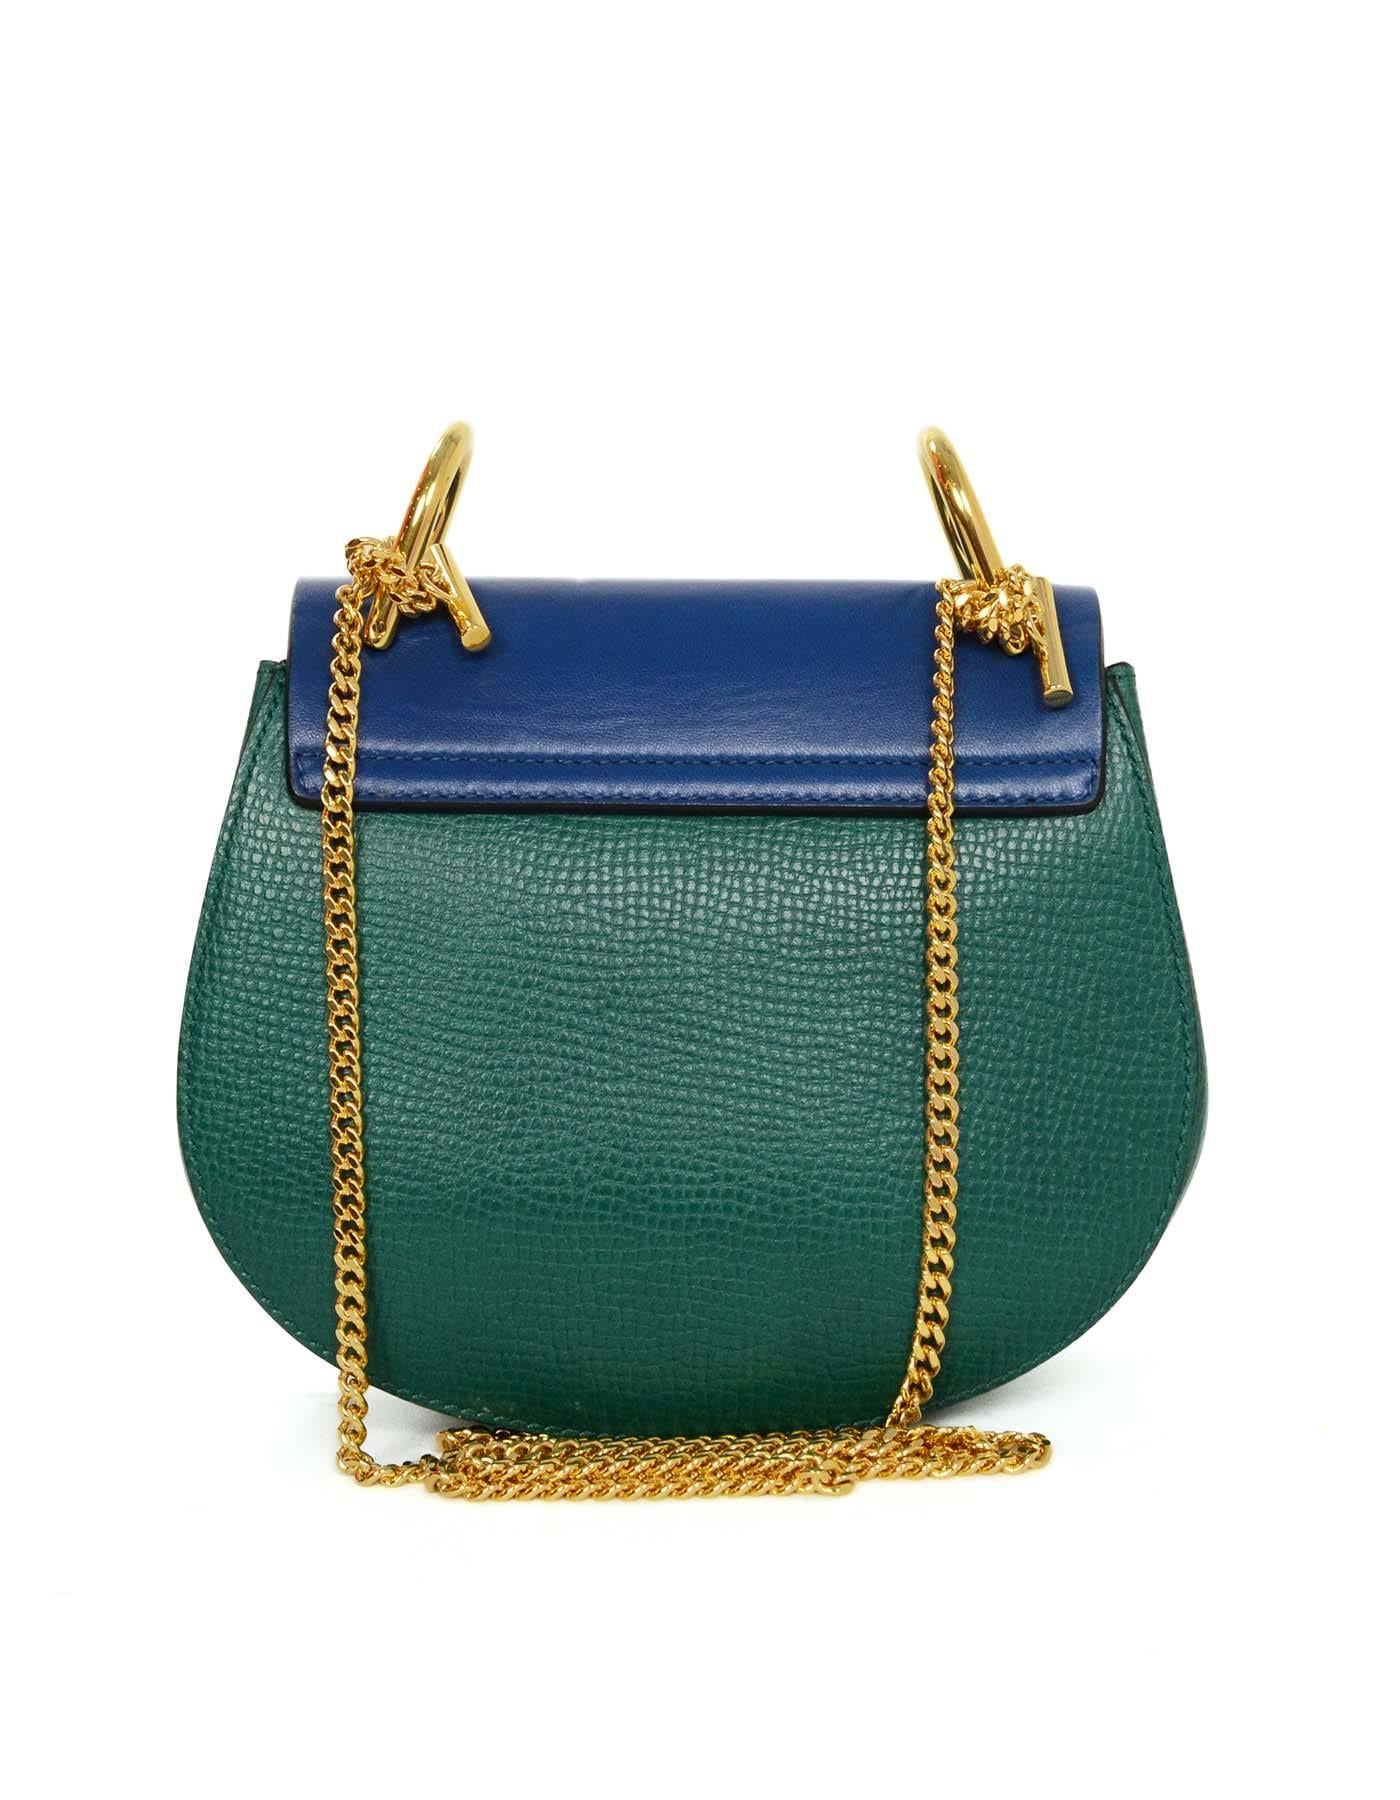 Chloe Blue and Green Bicolor Drew Small Crossbody Bag
Features blue flap with green base and goldtone twist lock closure

-Made In: Italy
-Year of Production: 2015
-Color: Blue and green
-Hardware: Goldtone
-Materials: Mix texture calfskin